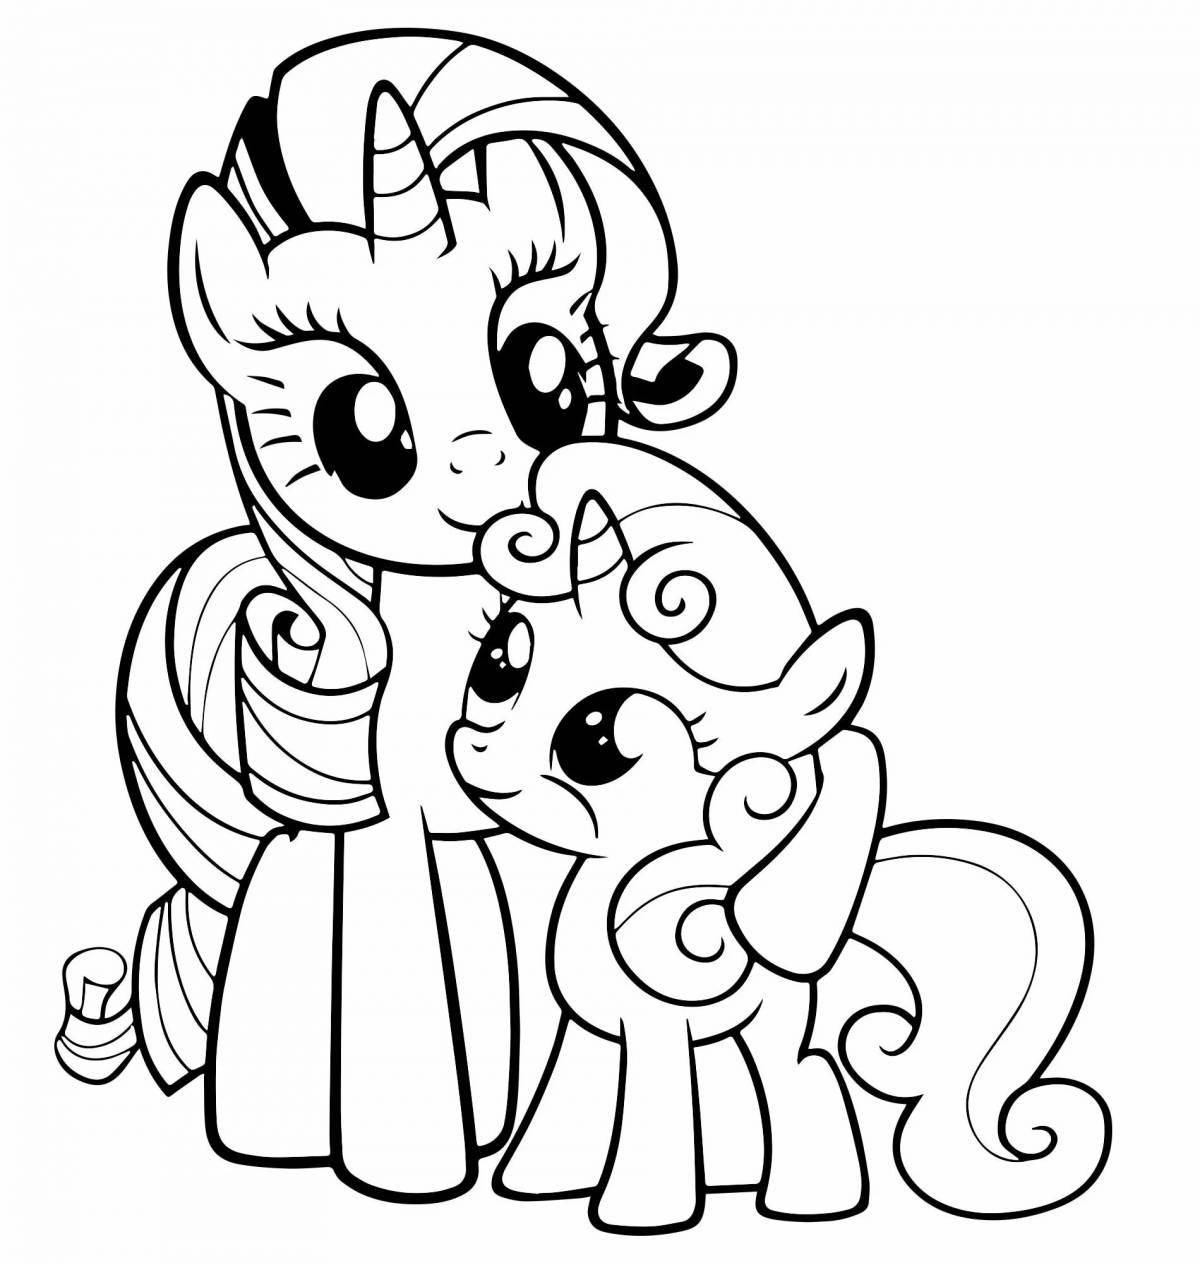 May little pony colorful coloring page